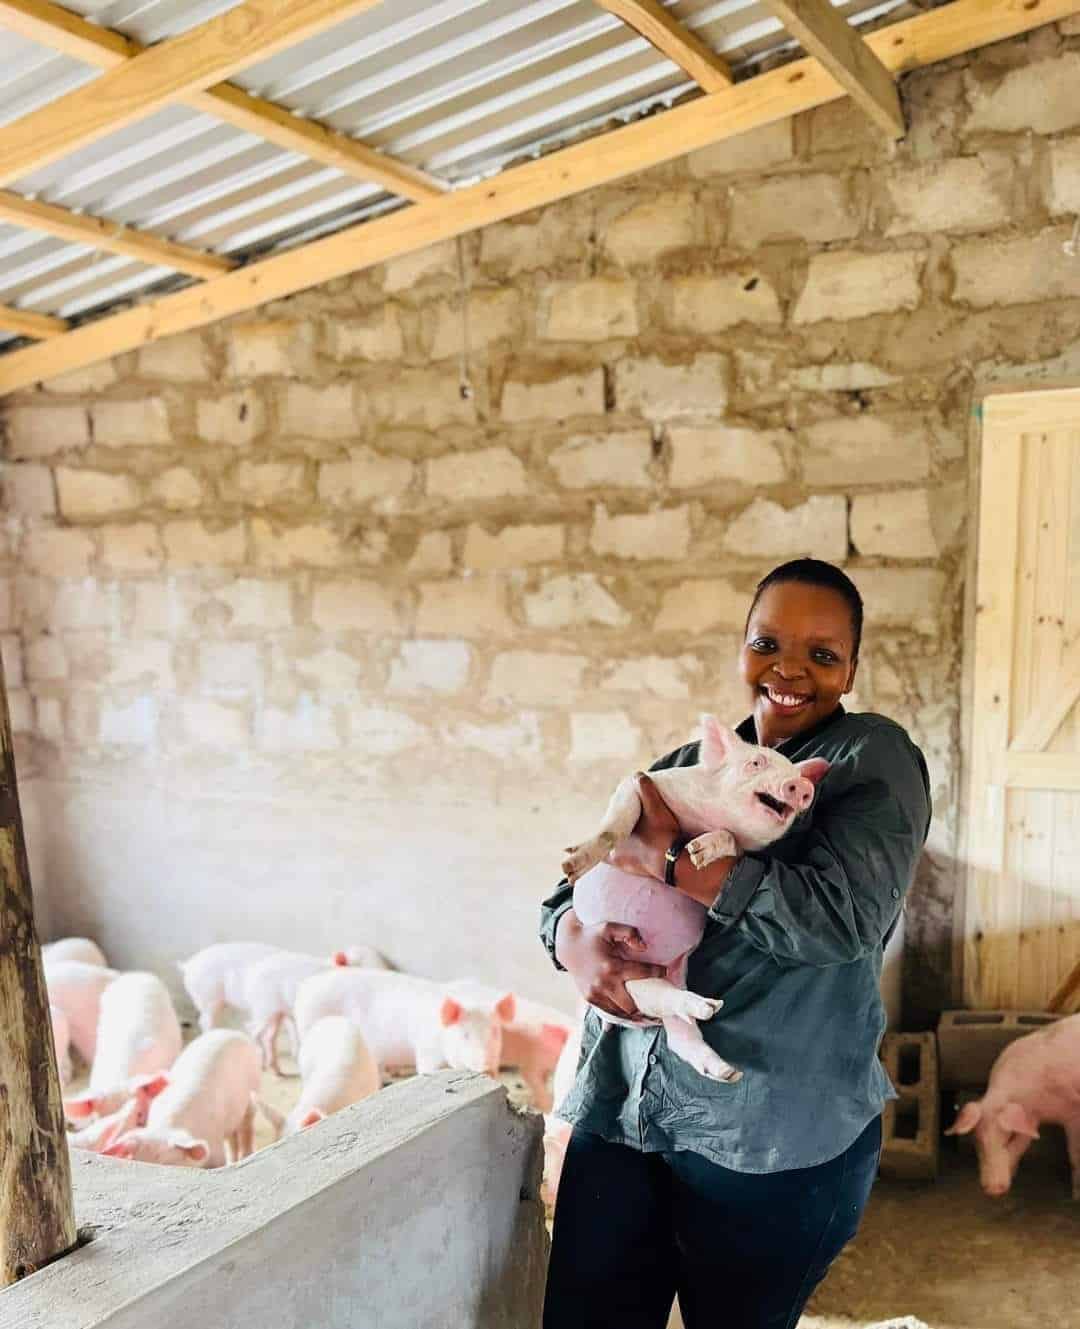 Former teacher inspires many as she starts pig farming with savings